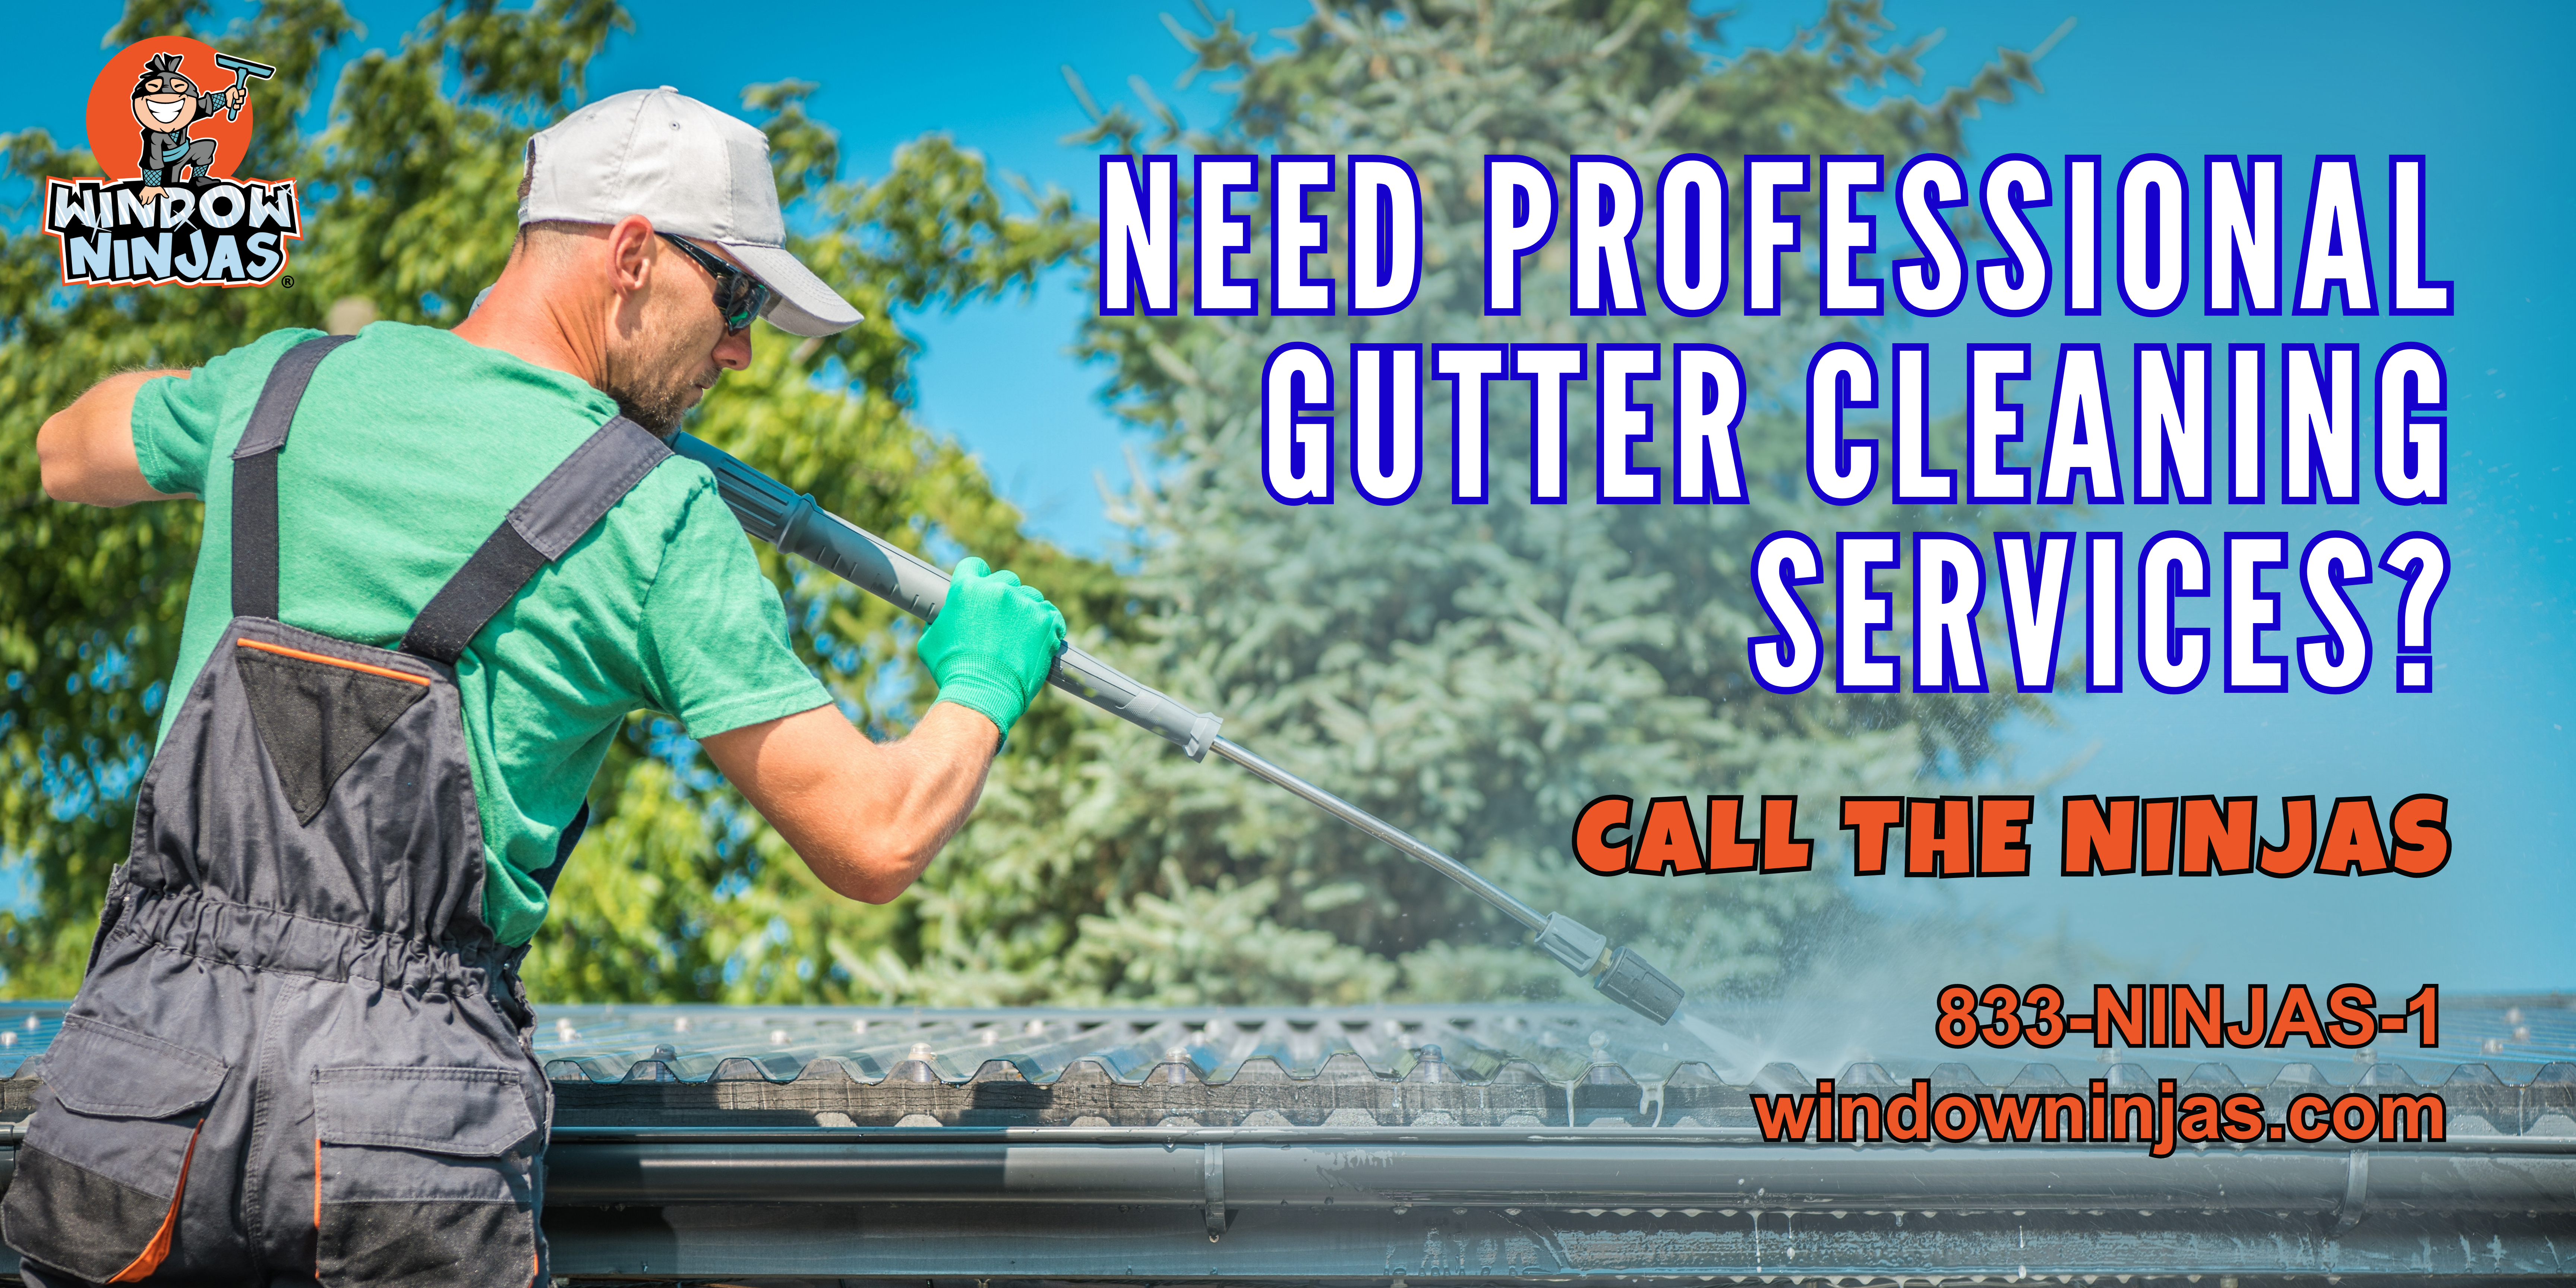 need professional gutter cleaning service? call the ninjas